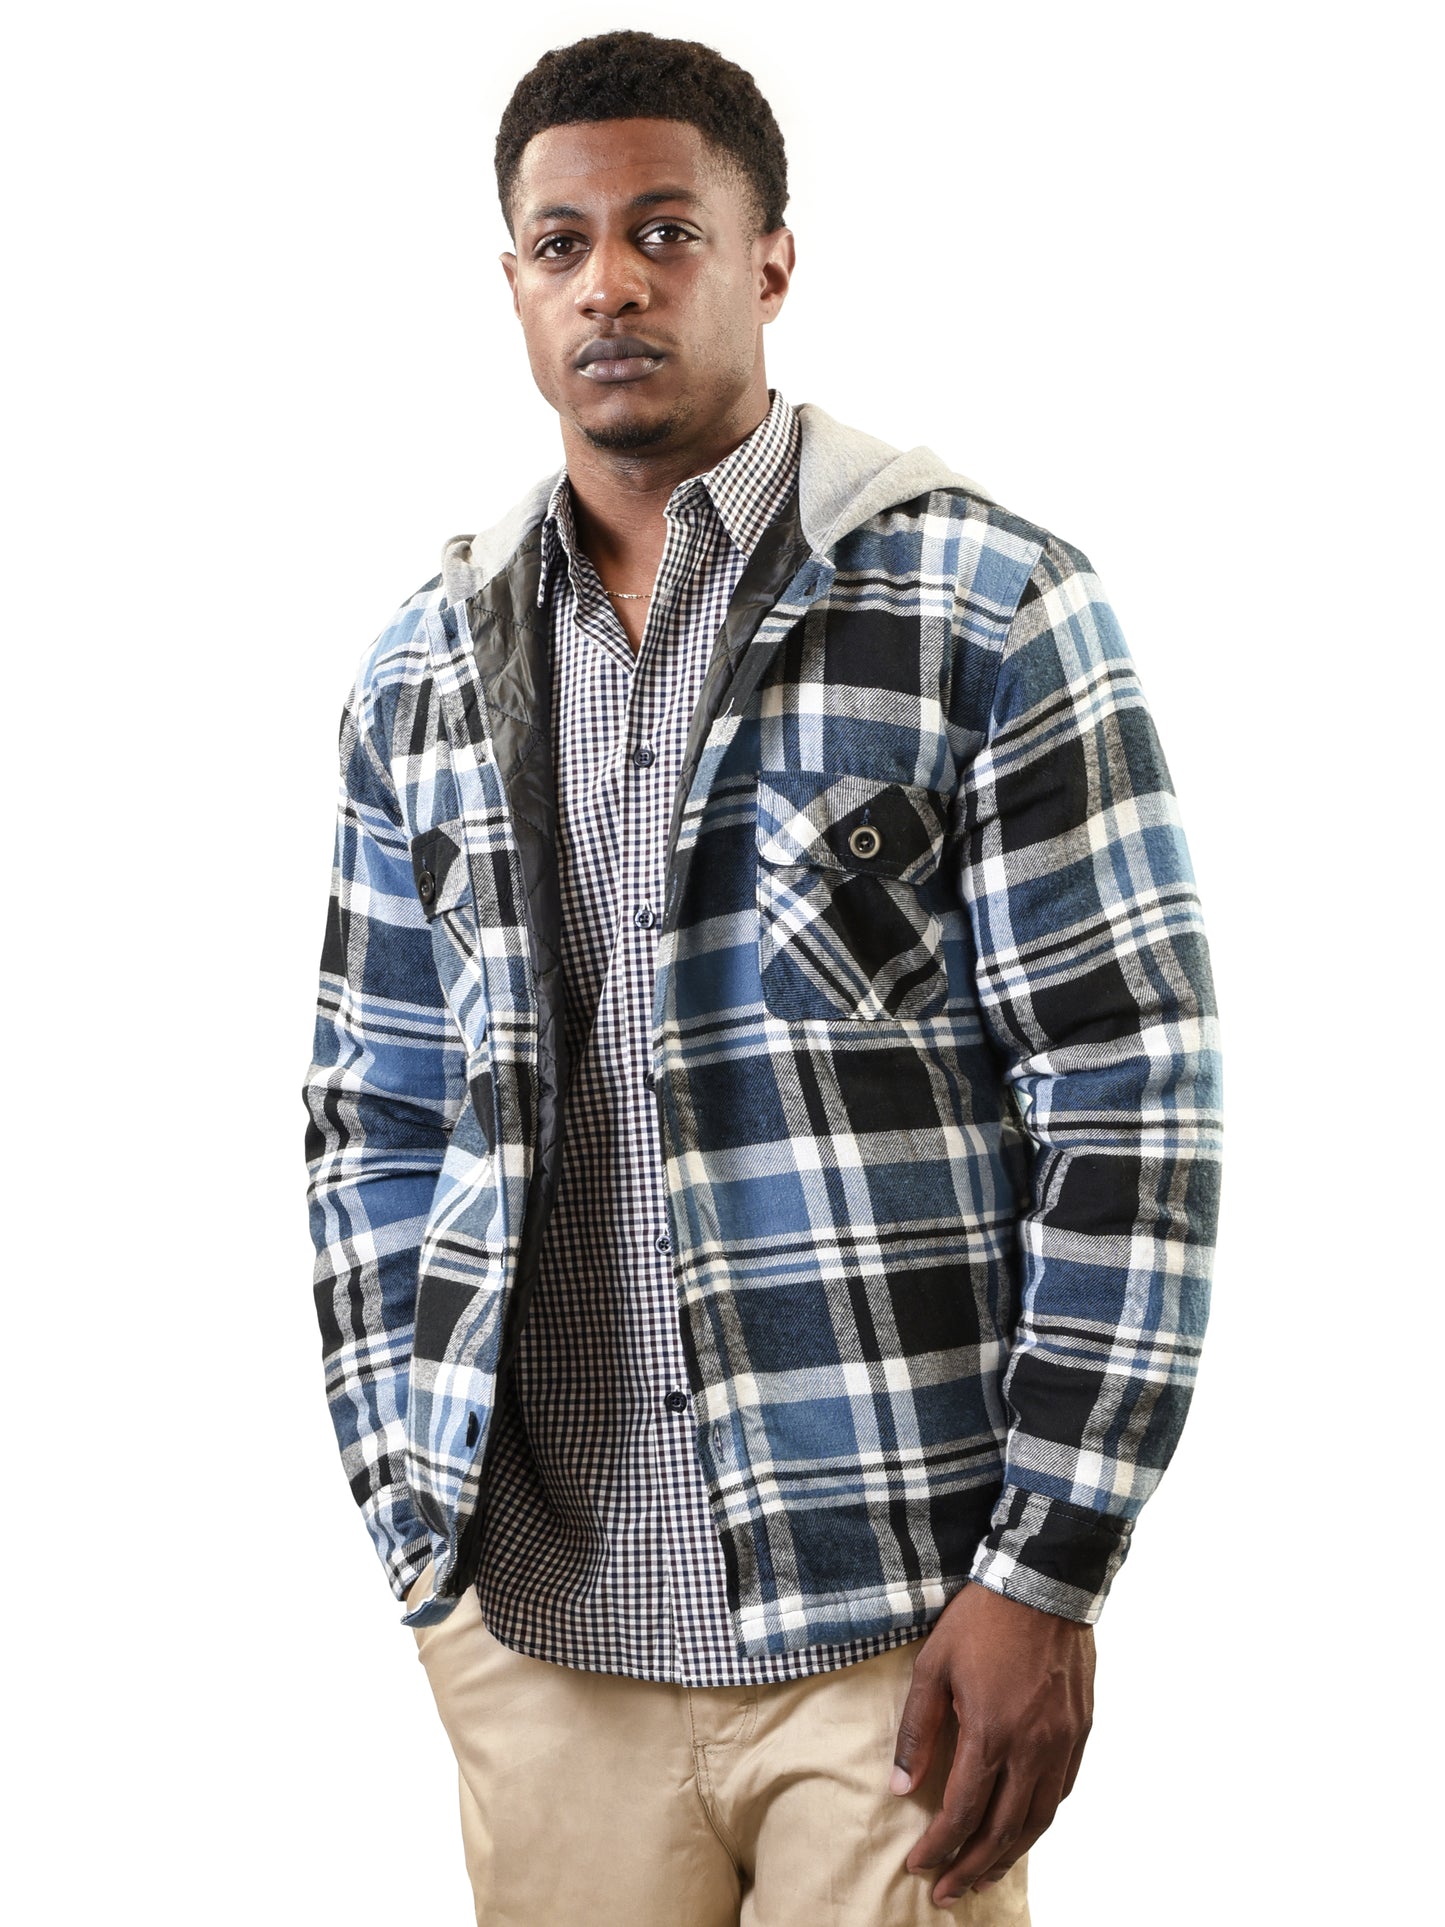 Young USA® Men's Jacket with Hood, Plaid Flannel in Blue Plaid